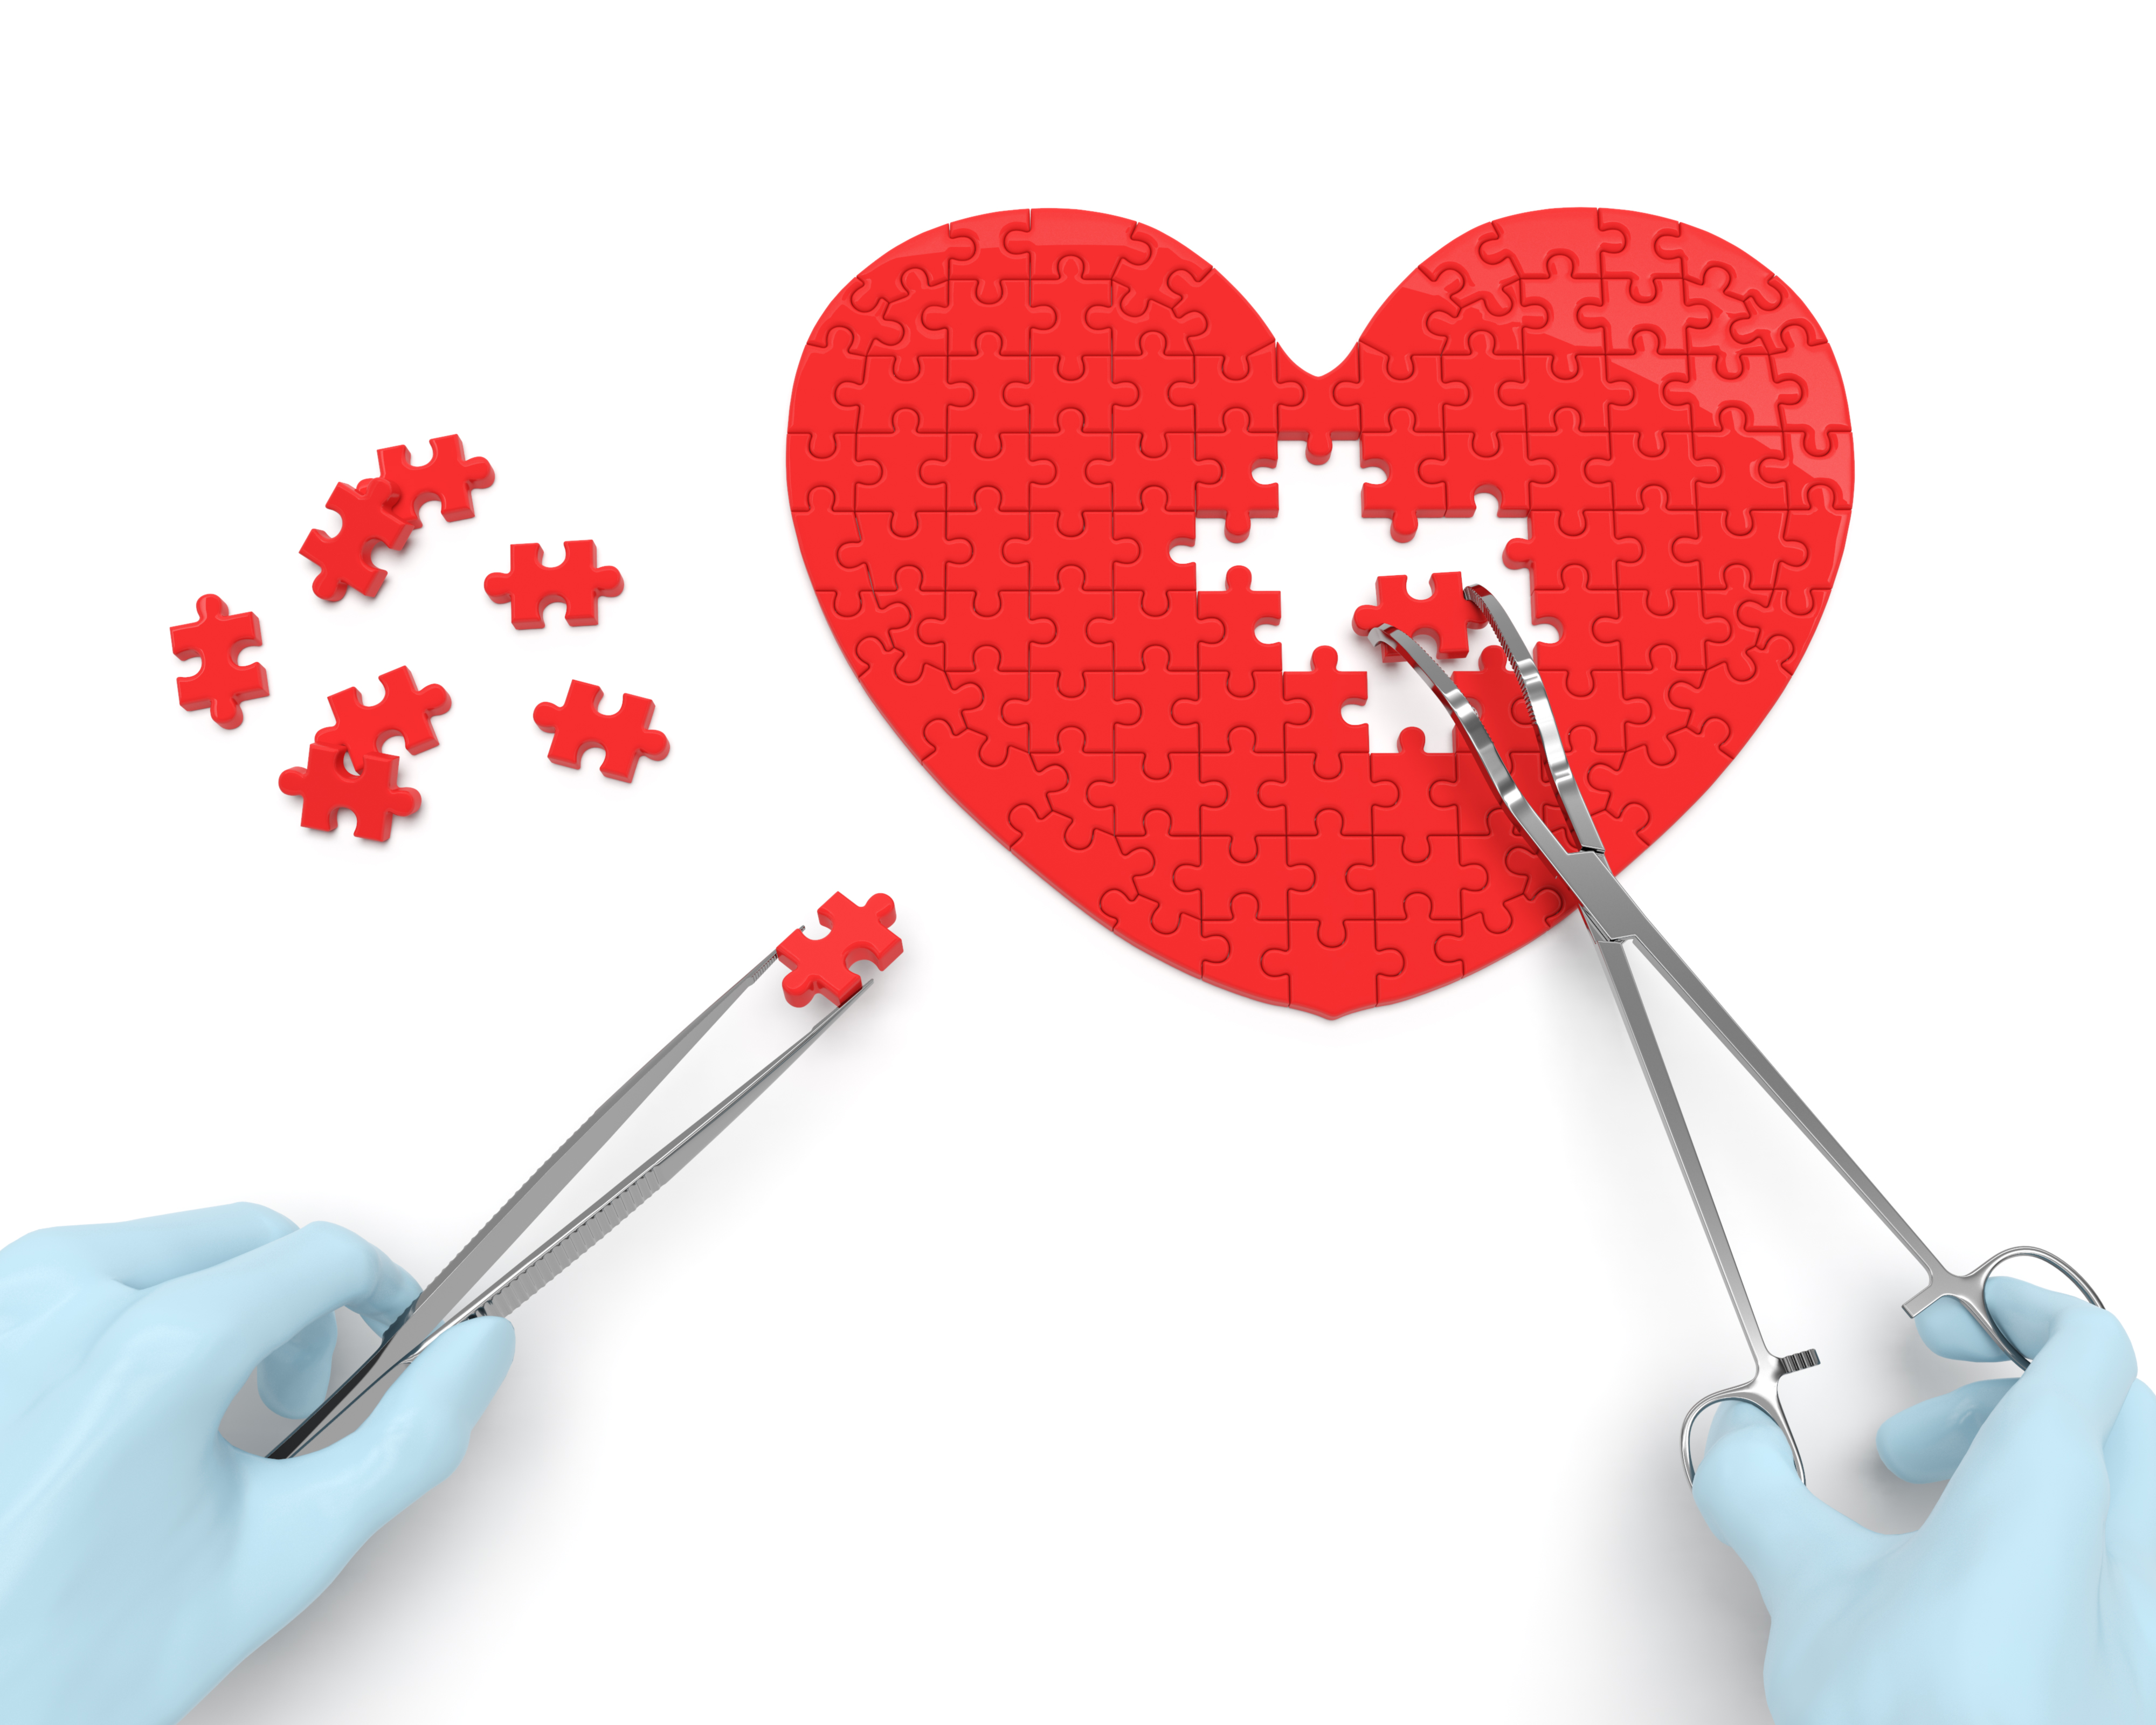 Hands in surgical gloves, using surgery tools, put the final pieces in a puzzle shaped like a red heart.